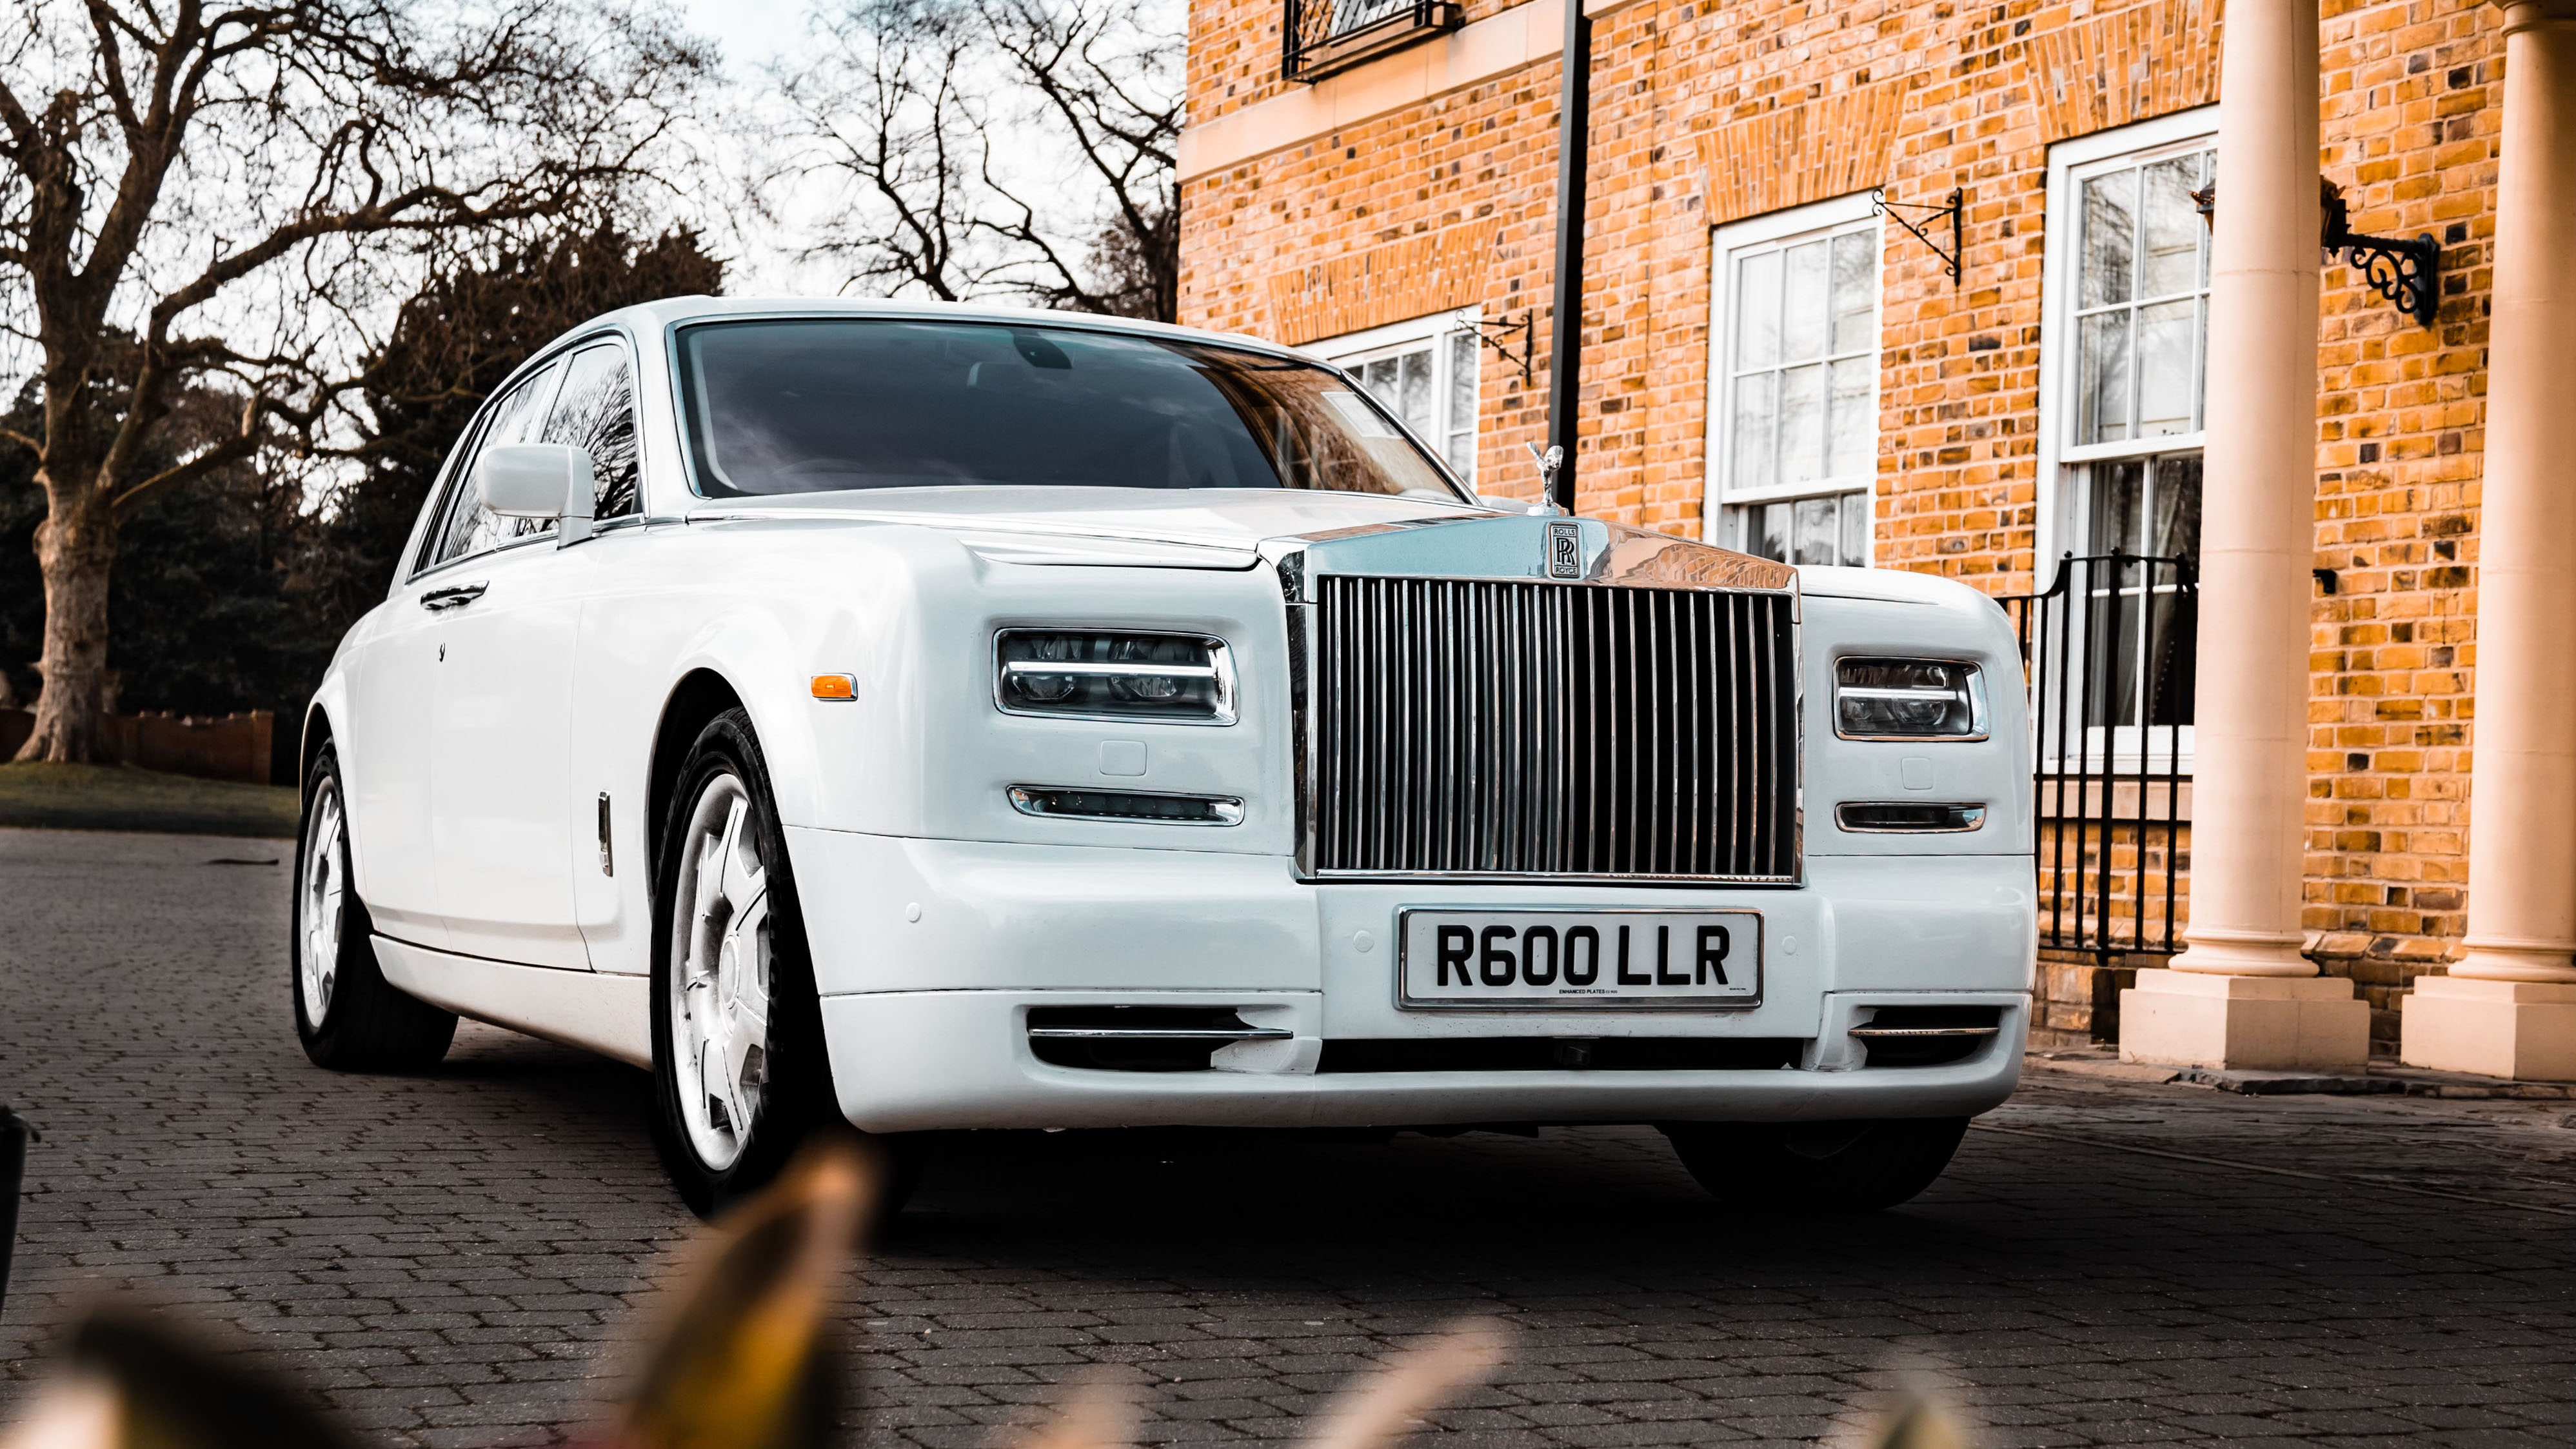 Modern white Rolls-Royce Phantom with its large chrome alloy wheels and iconic chrome front grill in attendance at a popular wedding venue in Great Yeldham in Essex.